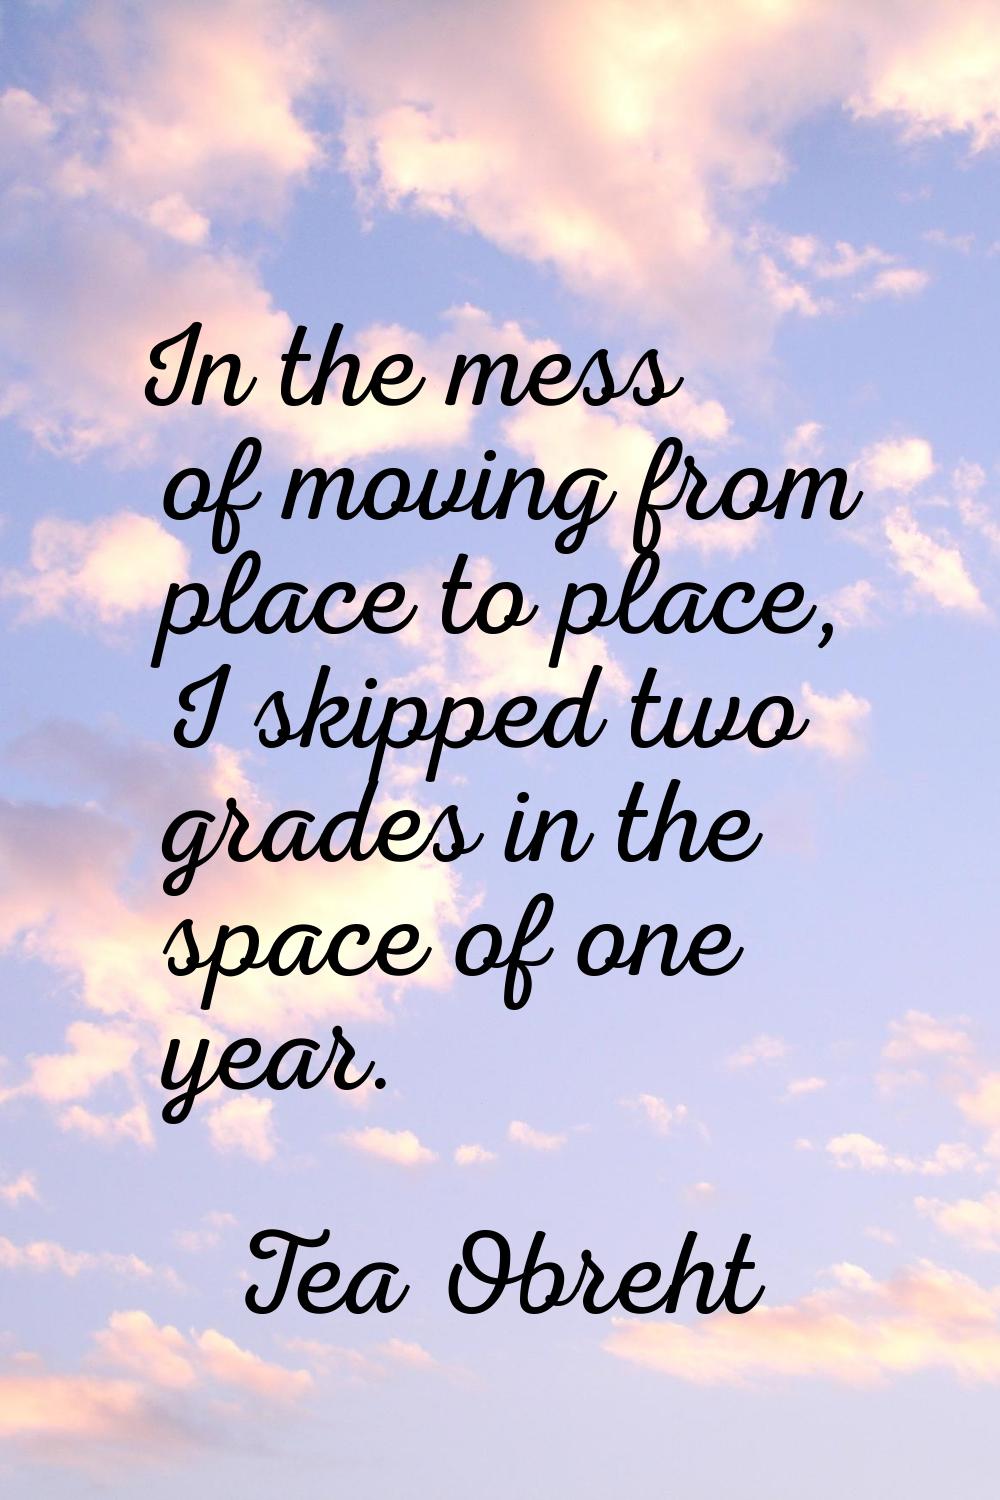 In the mess of moving from place to place, I skipped two grades in the space of one year.